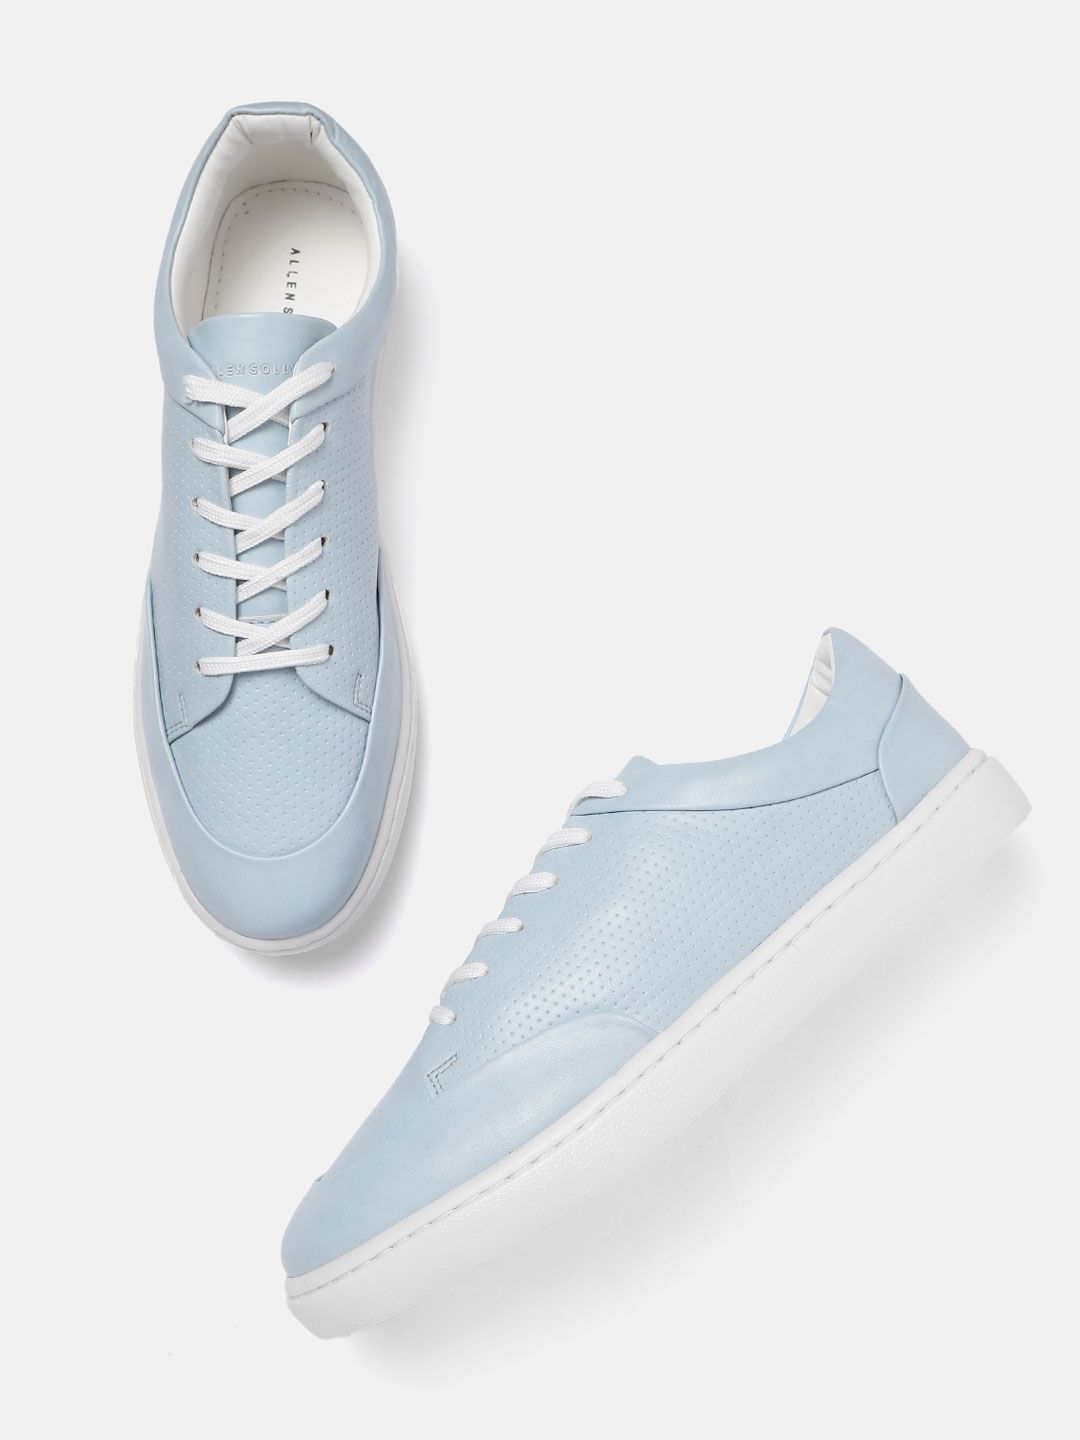 Allen Solly Women Blue Perforated Sneakers Price in India